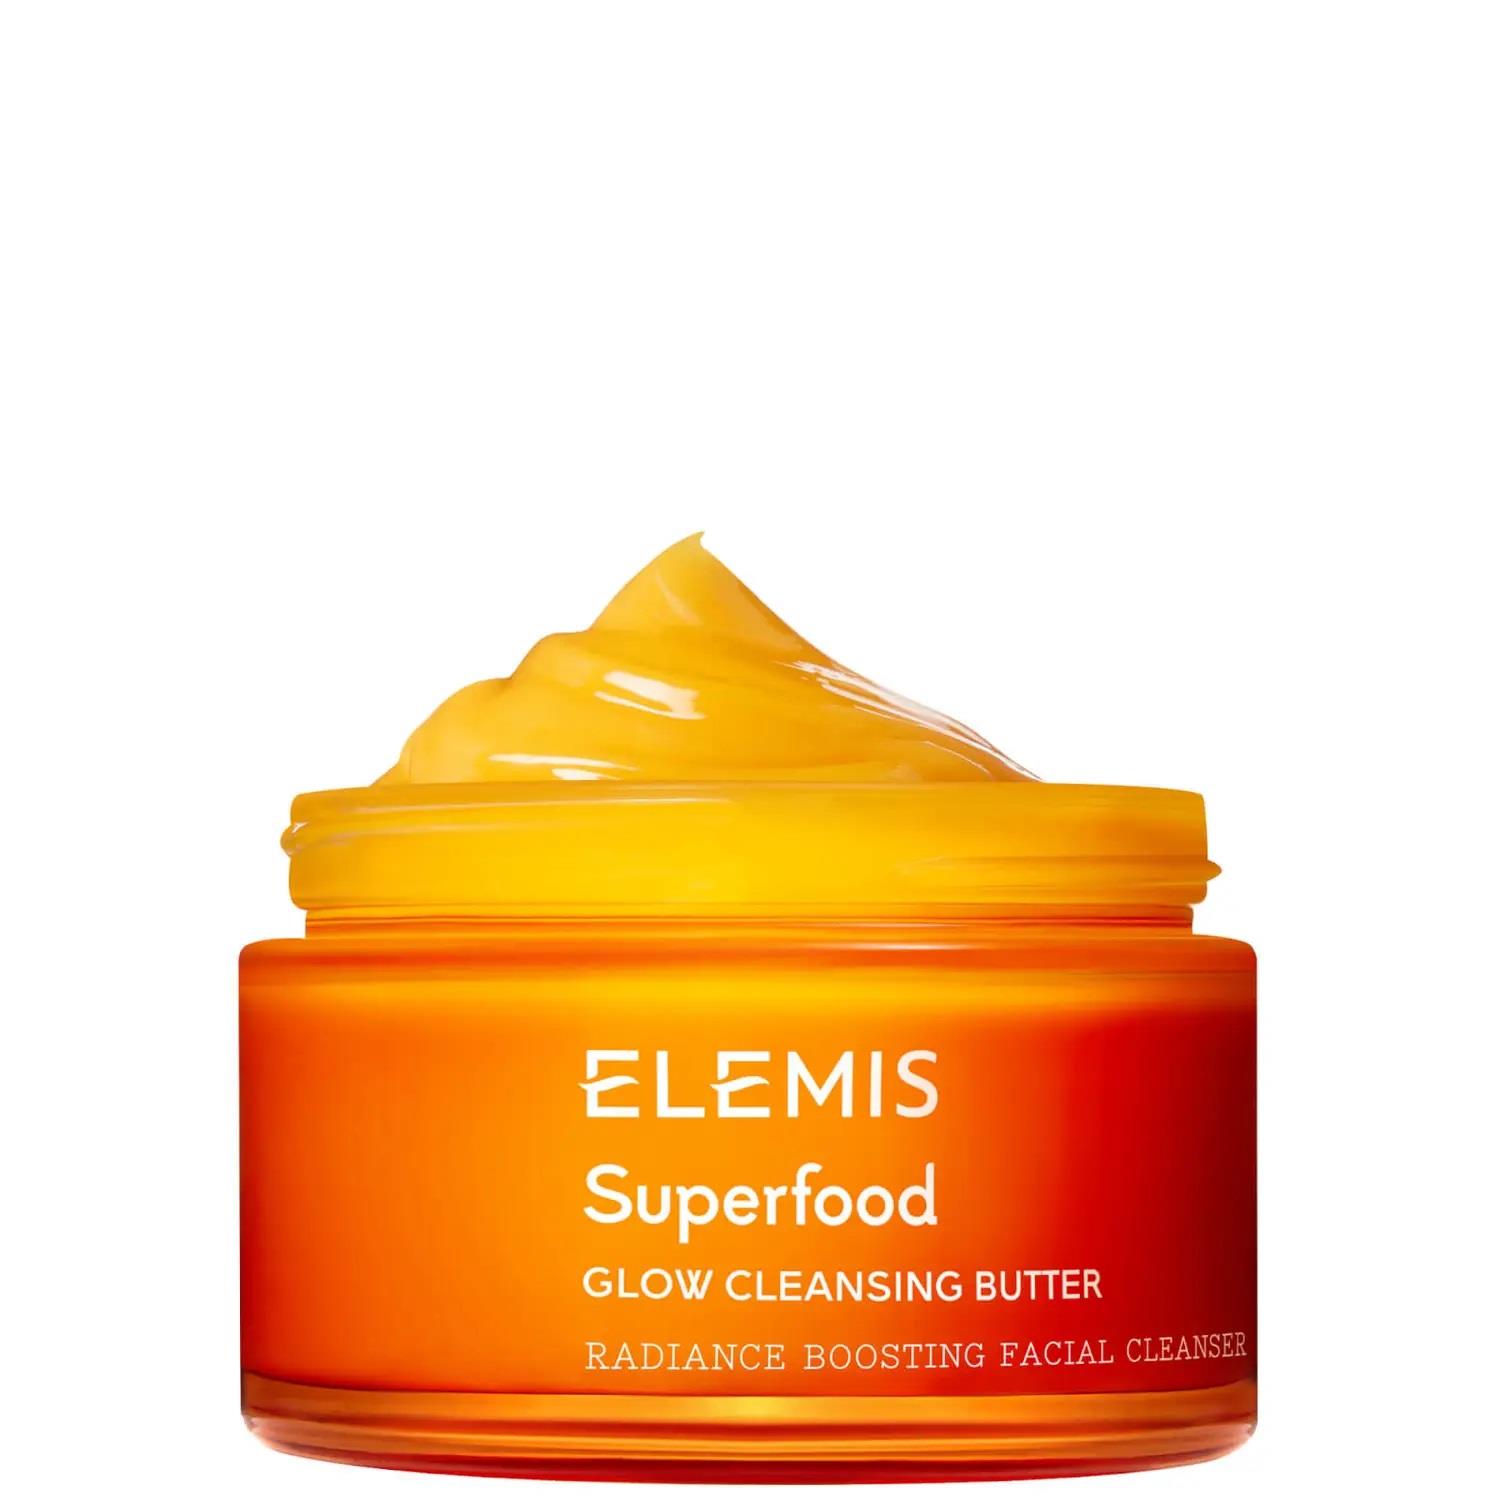 Elemis_Burro struccante Superfood AHA Glow Cleansing Butter 90ml